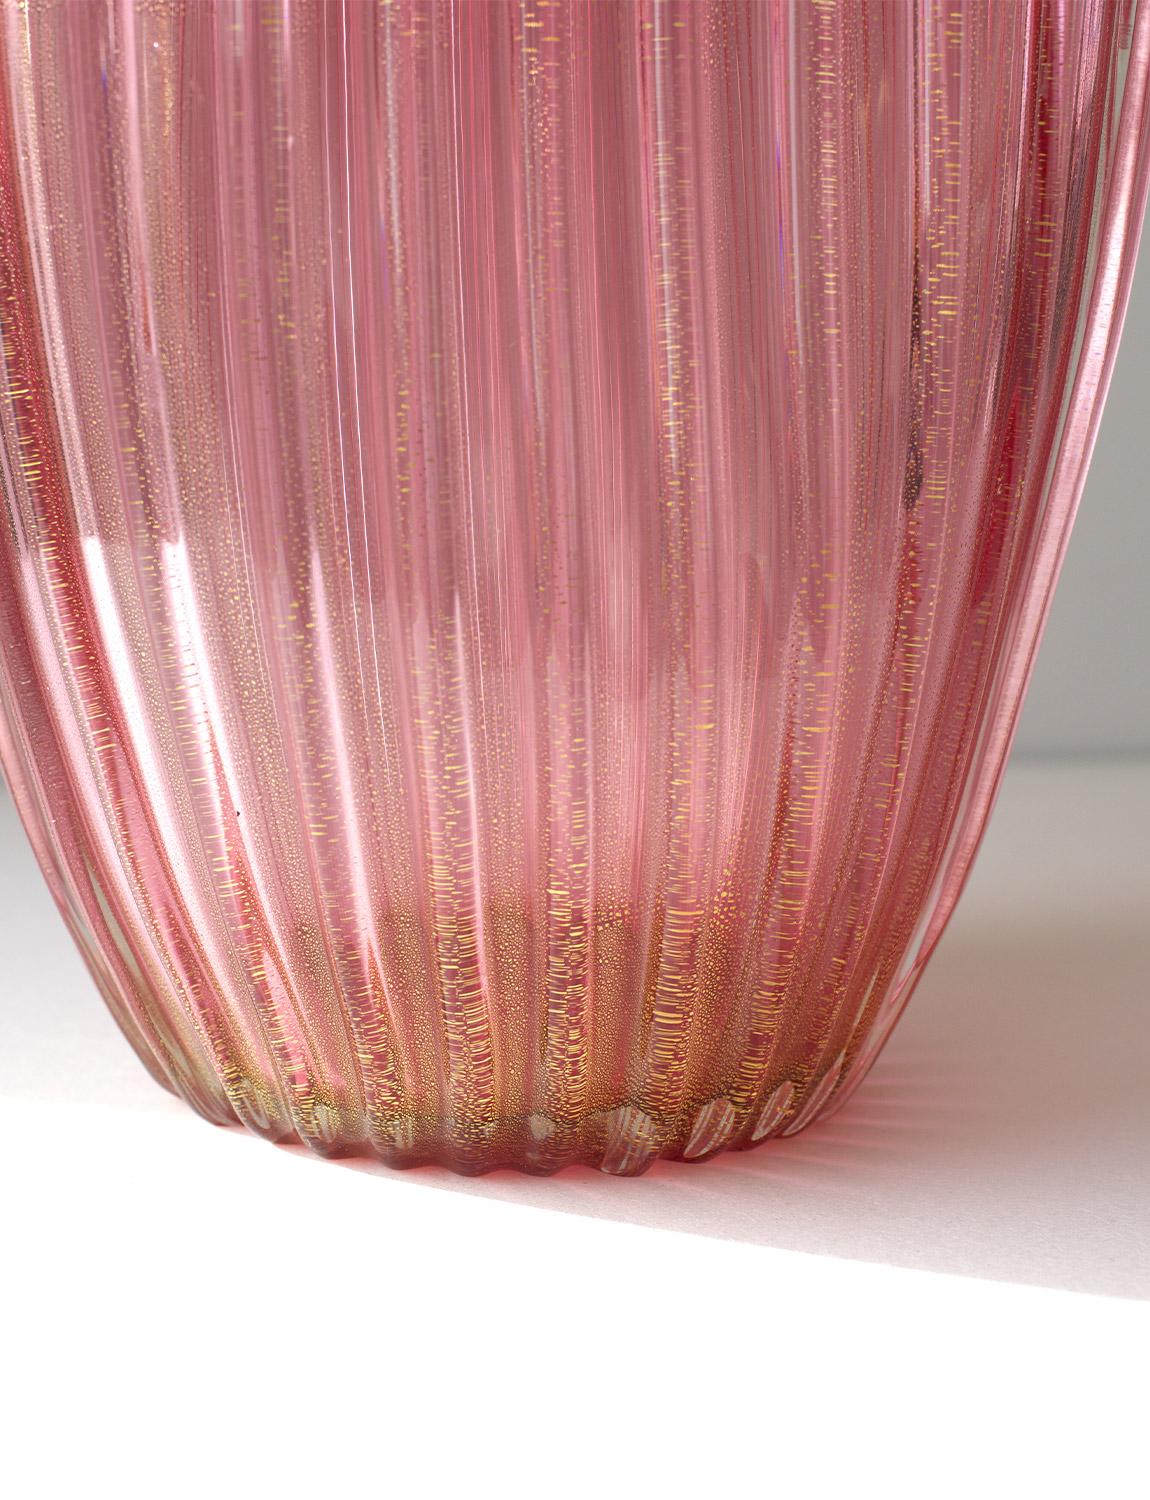 Large Pink and gold 1950s Archimede Seguso Hand-blown Murano Glass Vase For Sale 8